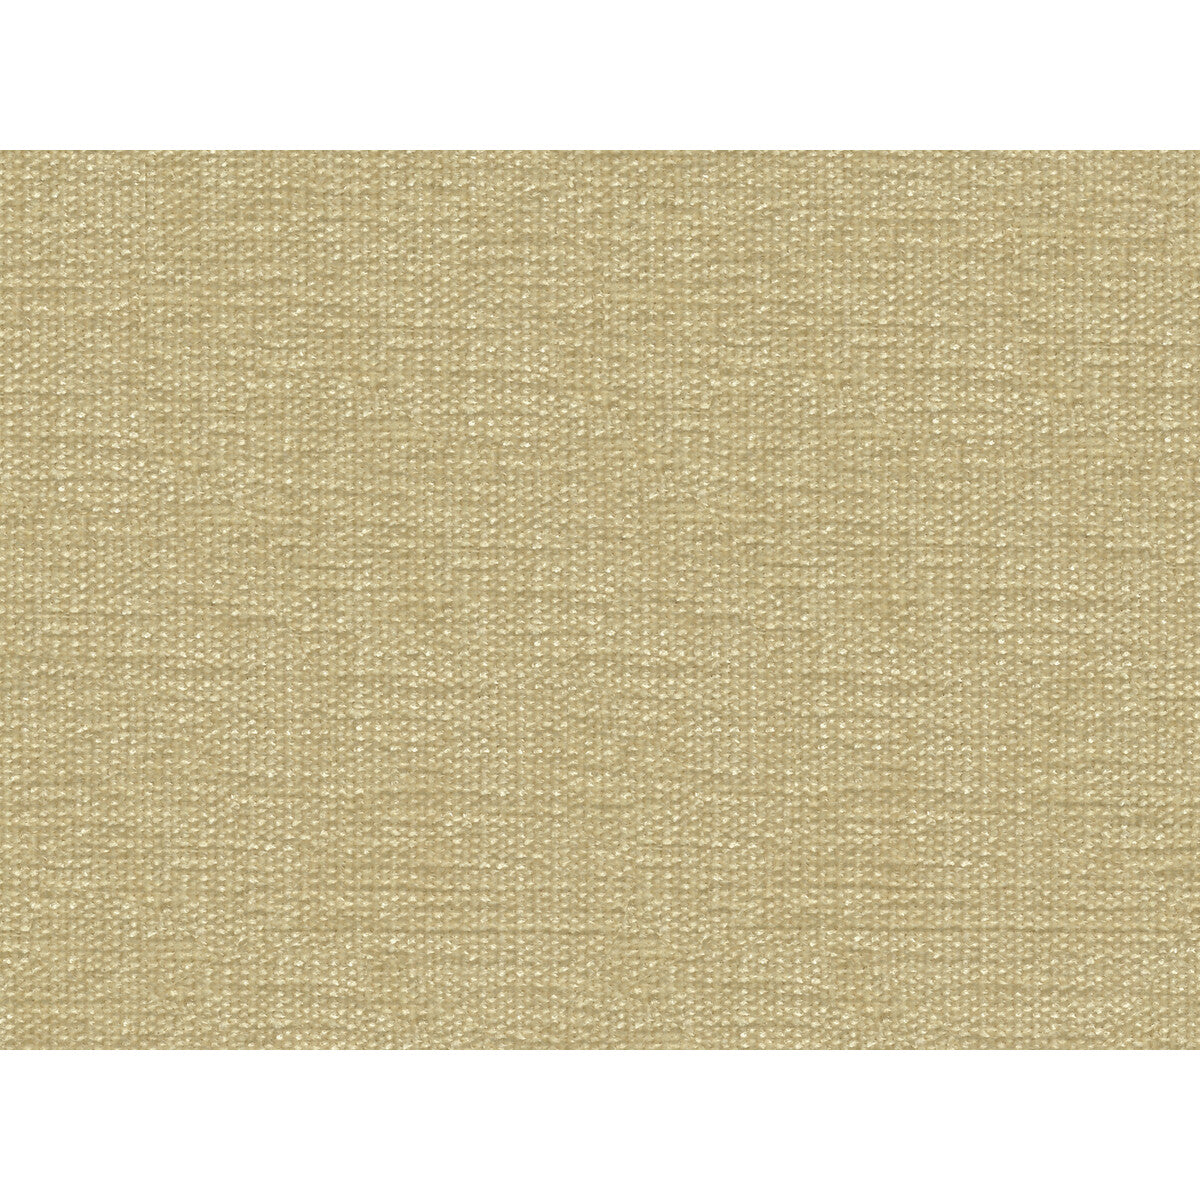 Kravet Contract fabric in 34961-1 color - pattern 34961.1.0 - by Kravet Contract in the Kravetarmor collection